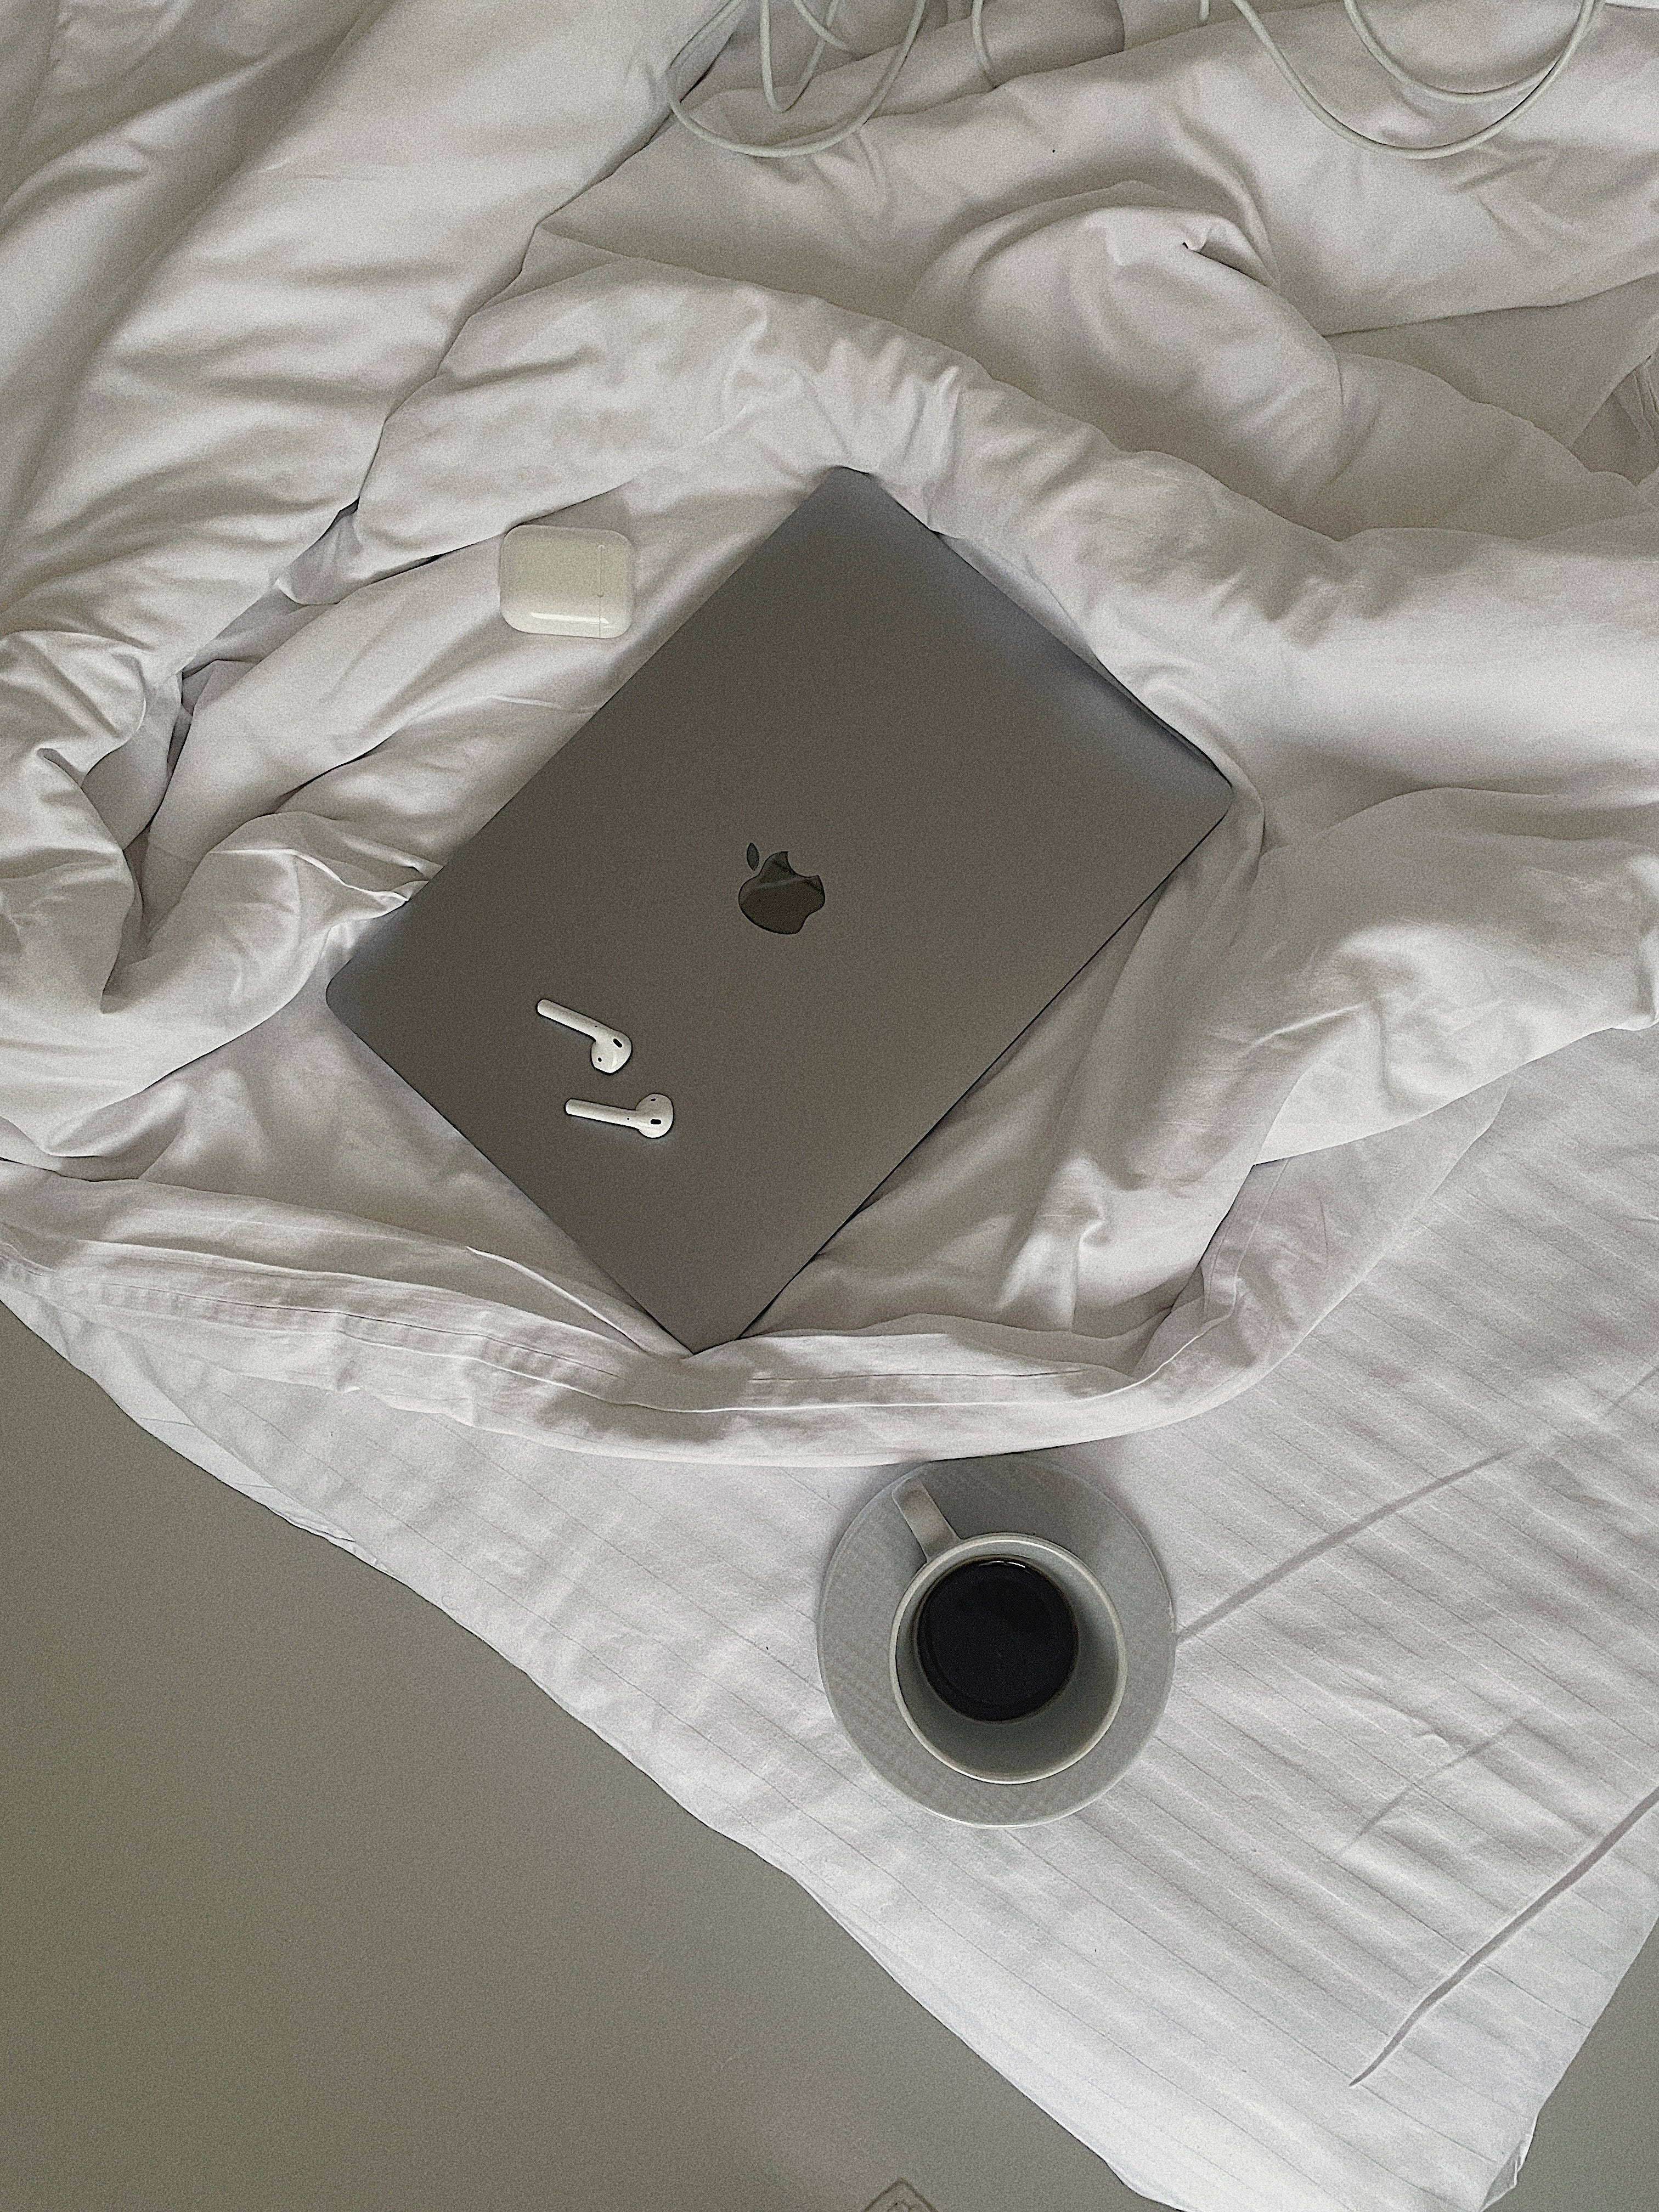 Download Aesthetic Silver Mac And Airpods Wallpaper